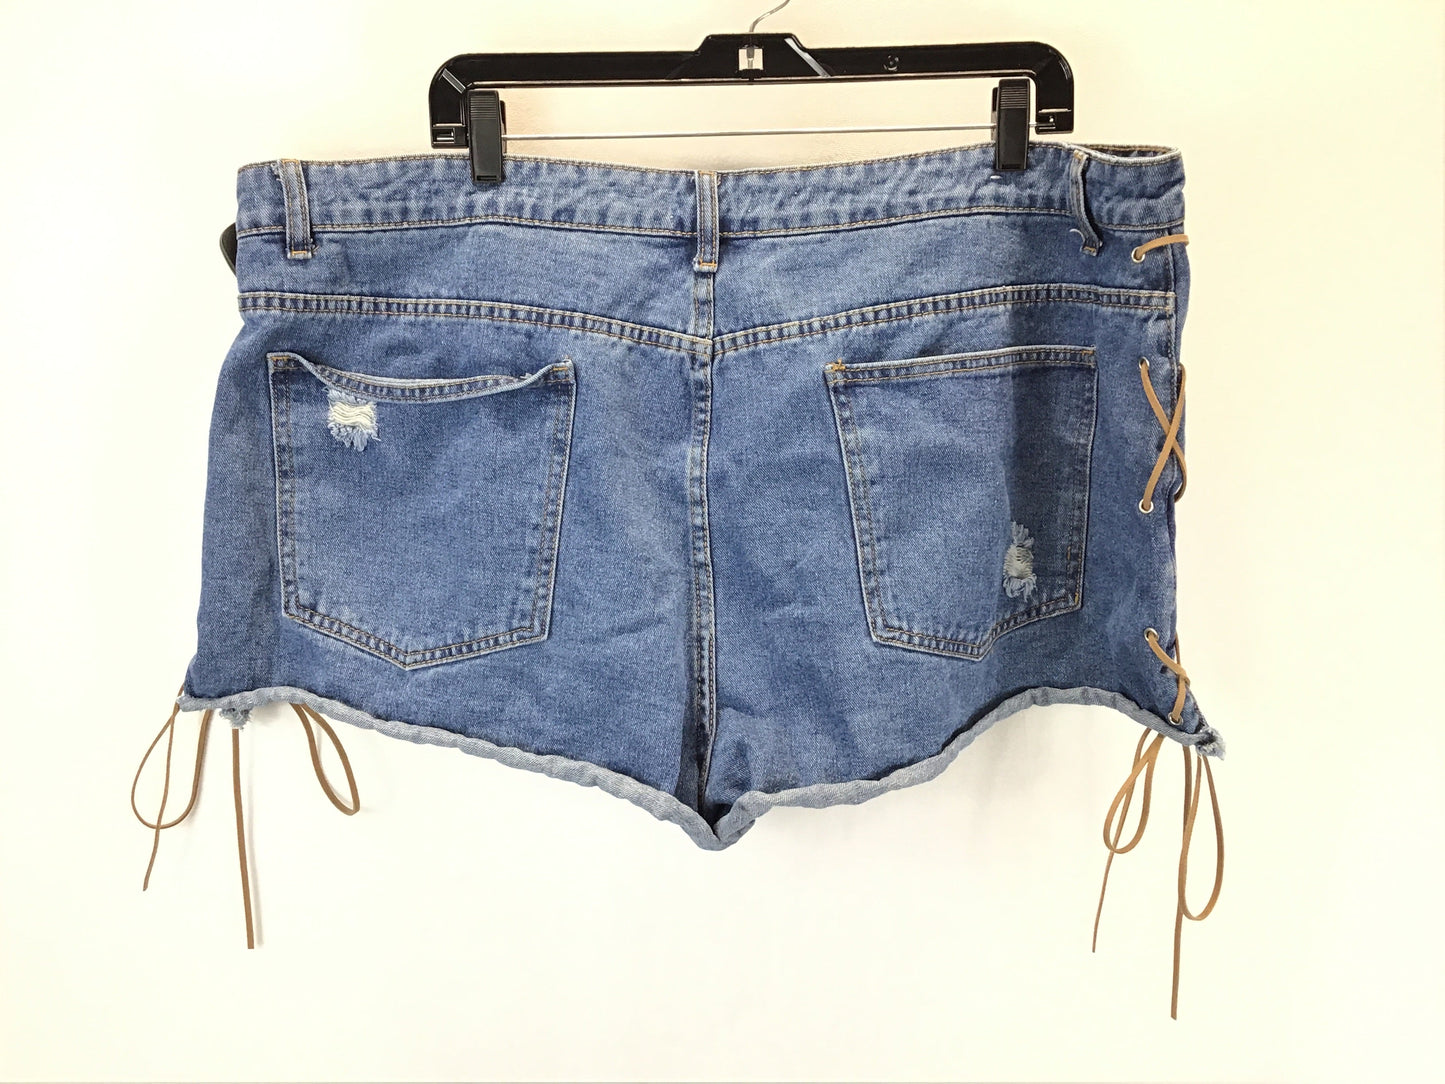 Shorts By Forever 21  Size: 20